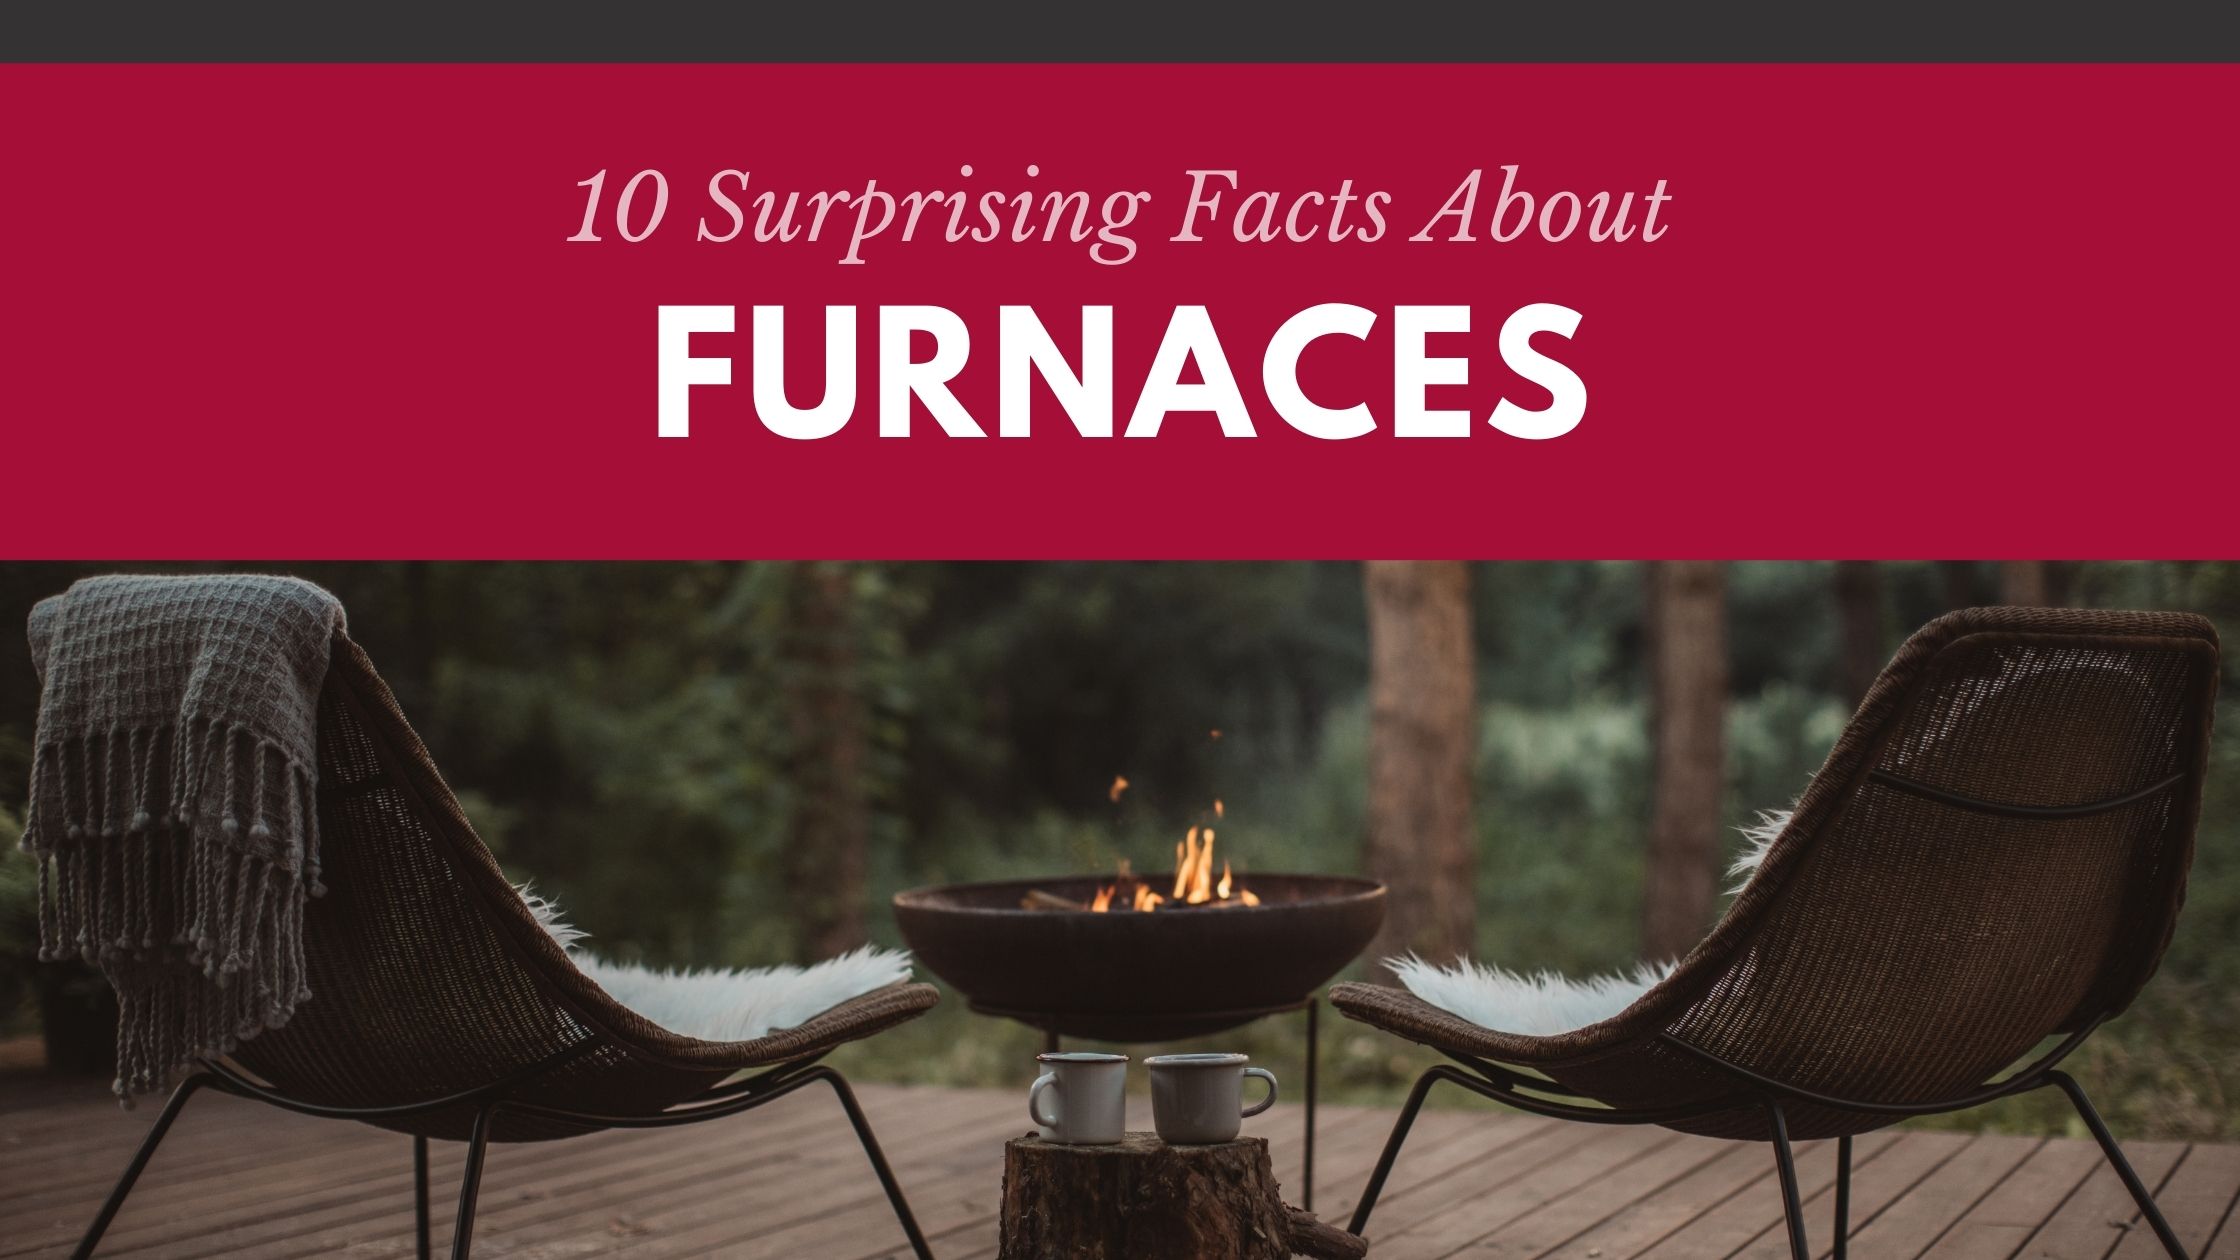 Facts About Furnaces